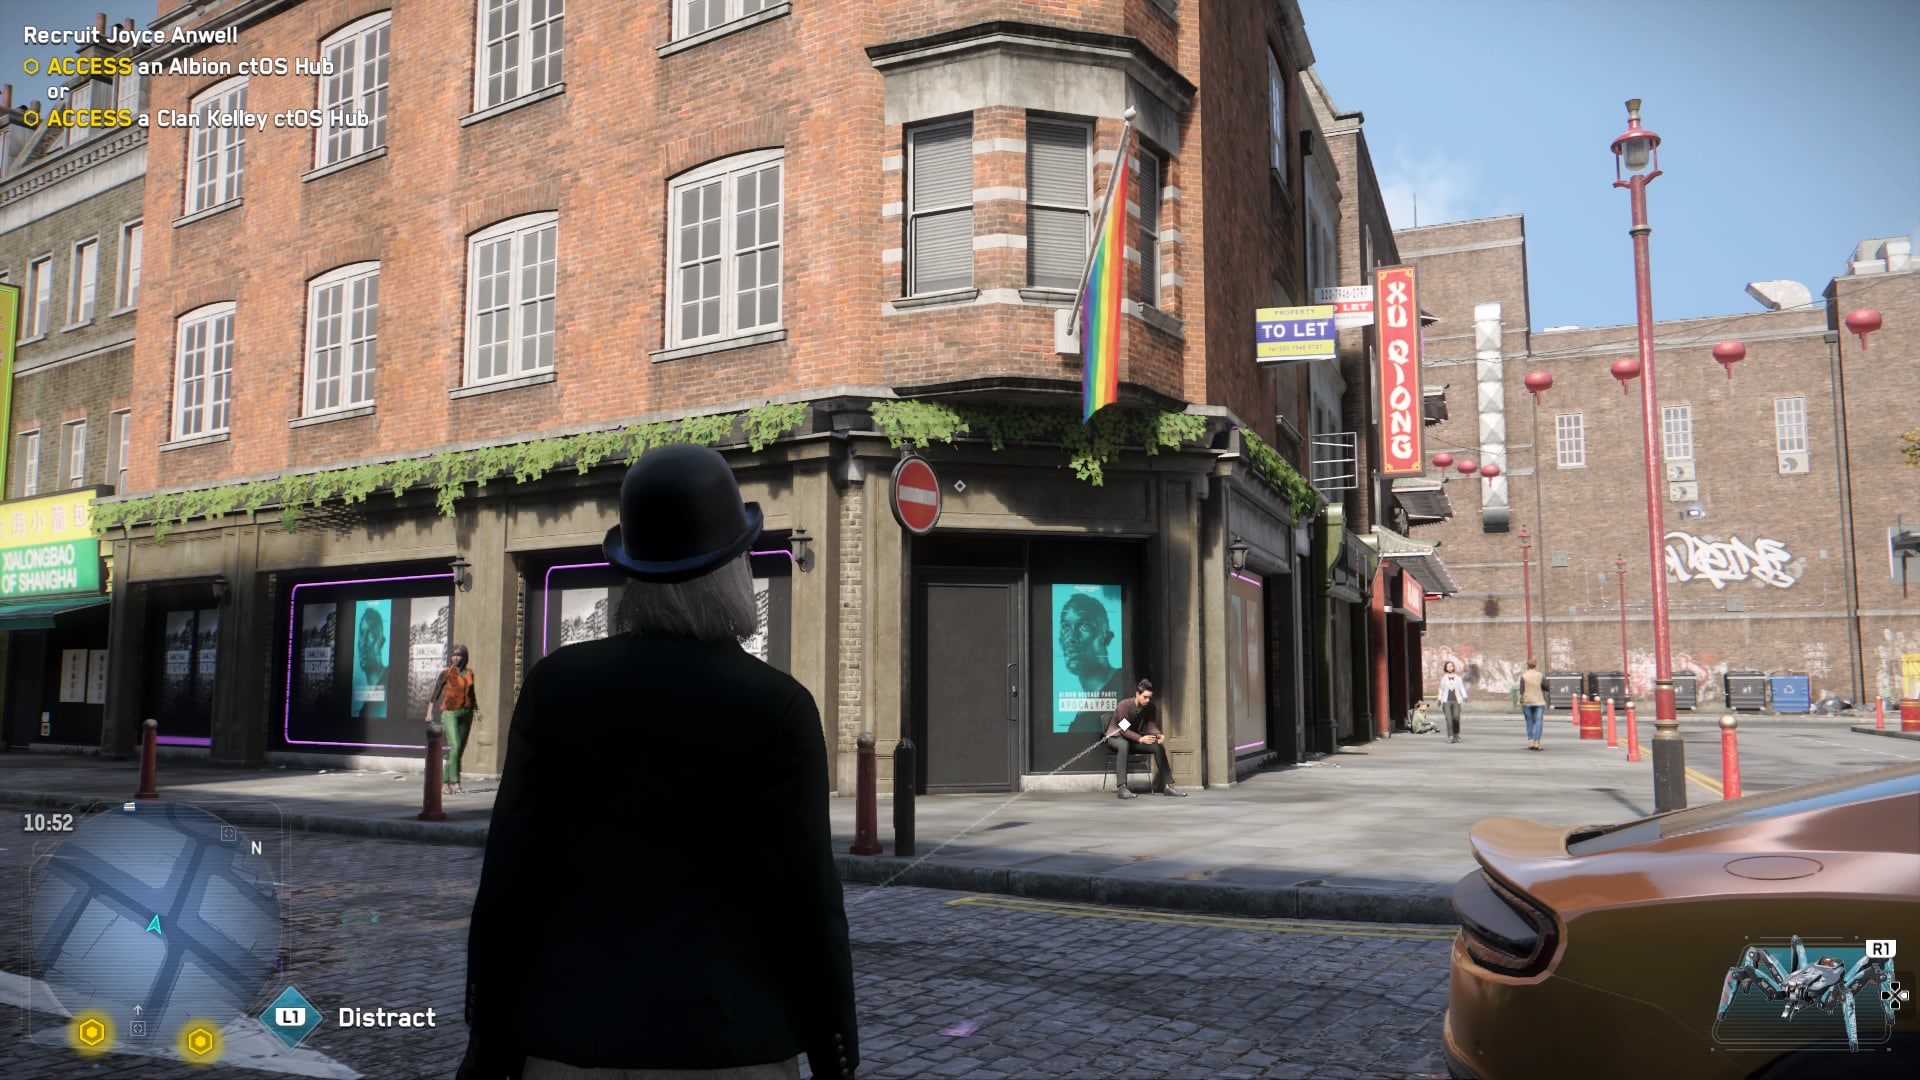 Watch Dogs: Legion is notably LGBT+ inclusive, featuring rainbow flags in place of several real-life London LGBT+ venues